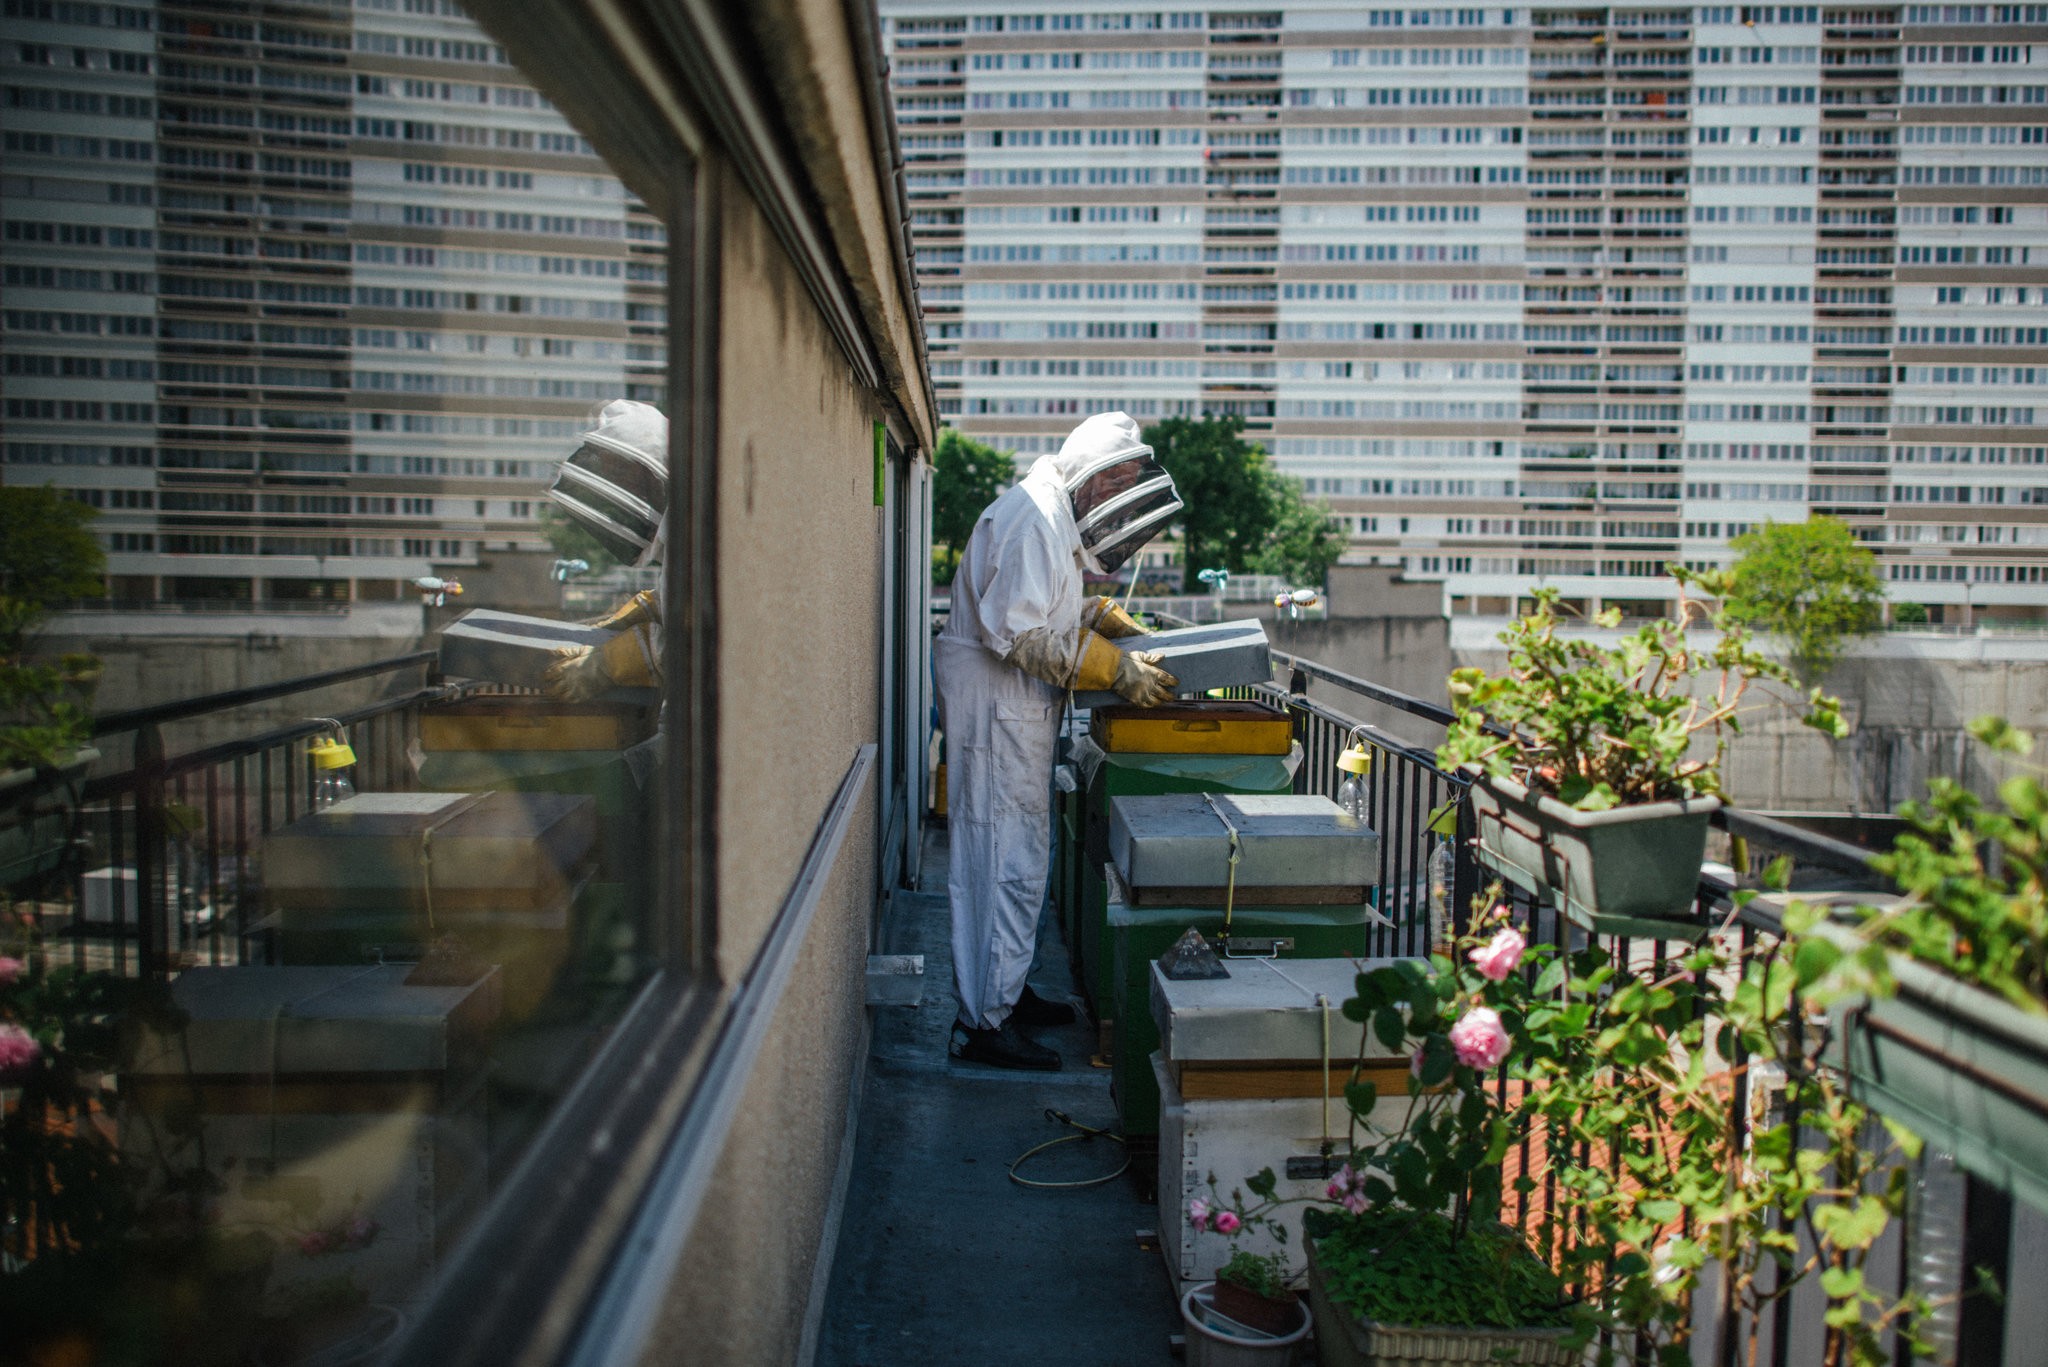  Armand Malvezin with the hives he tends on the balcony of his apartment in the 13th Arrondissement.   